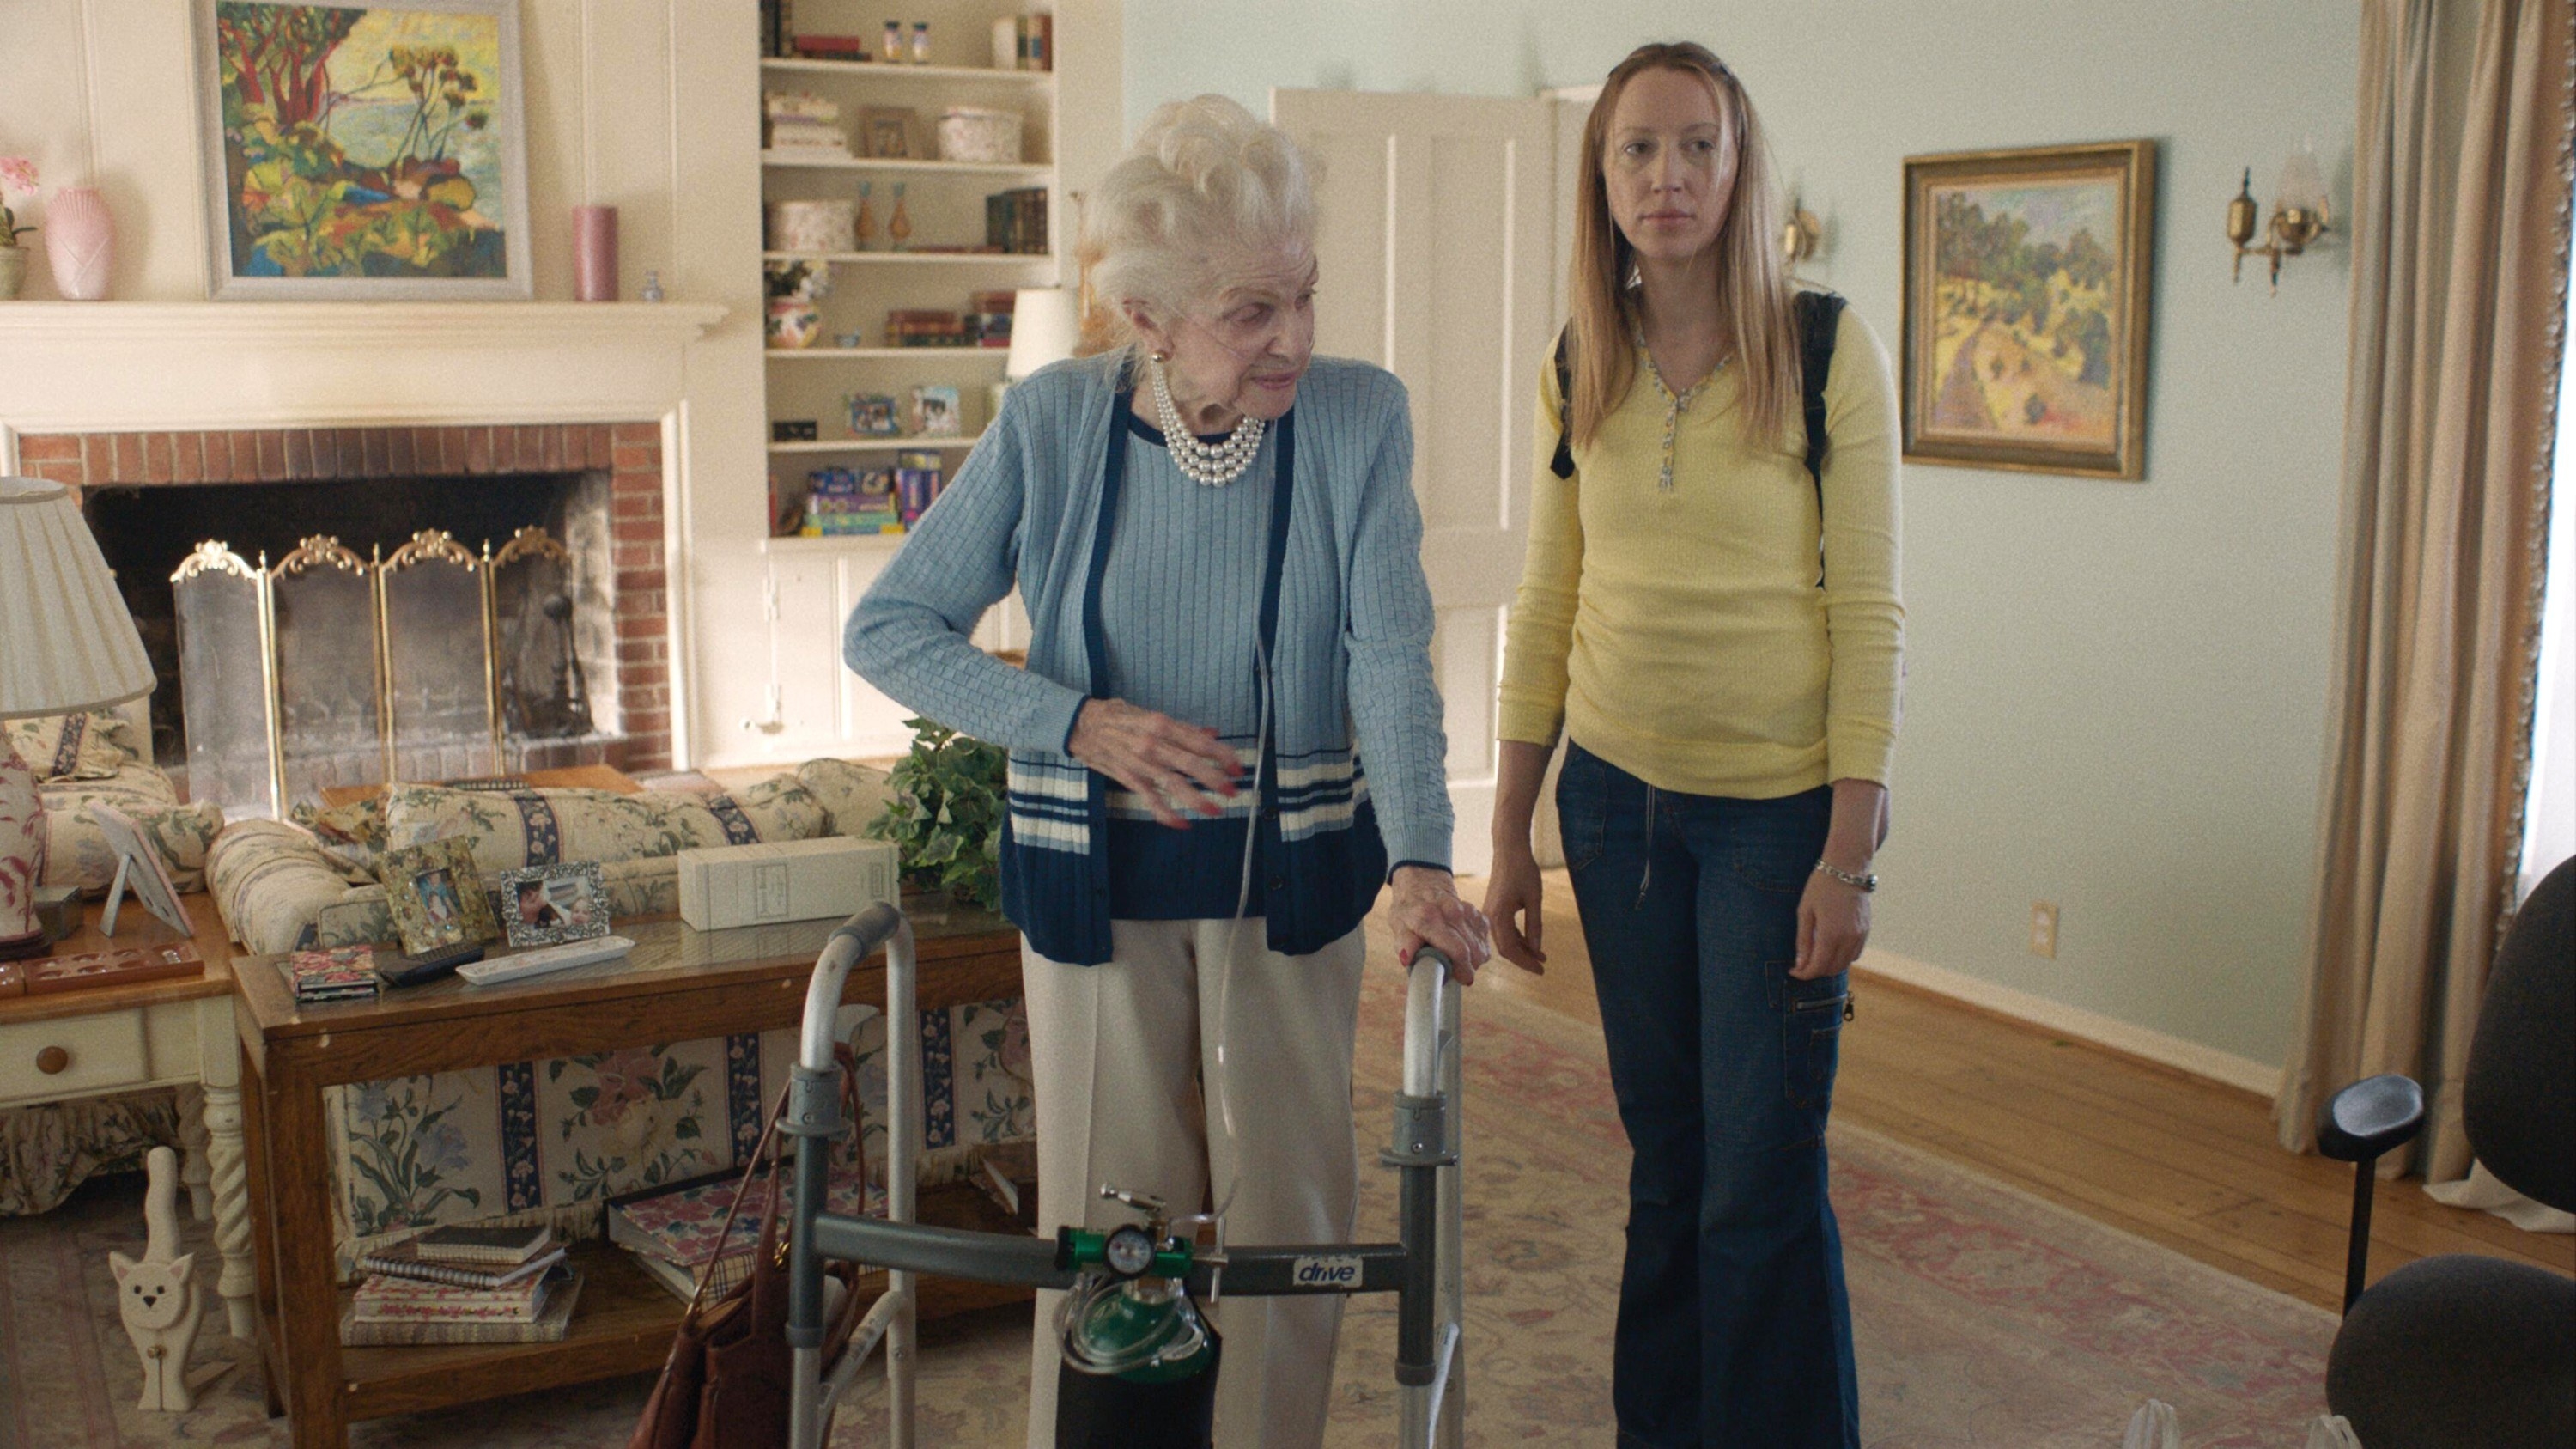 Anna stands, frowning next to her grandma who uses a walker and oxygen tank